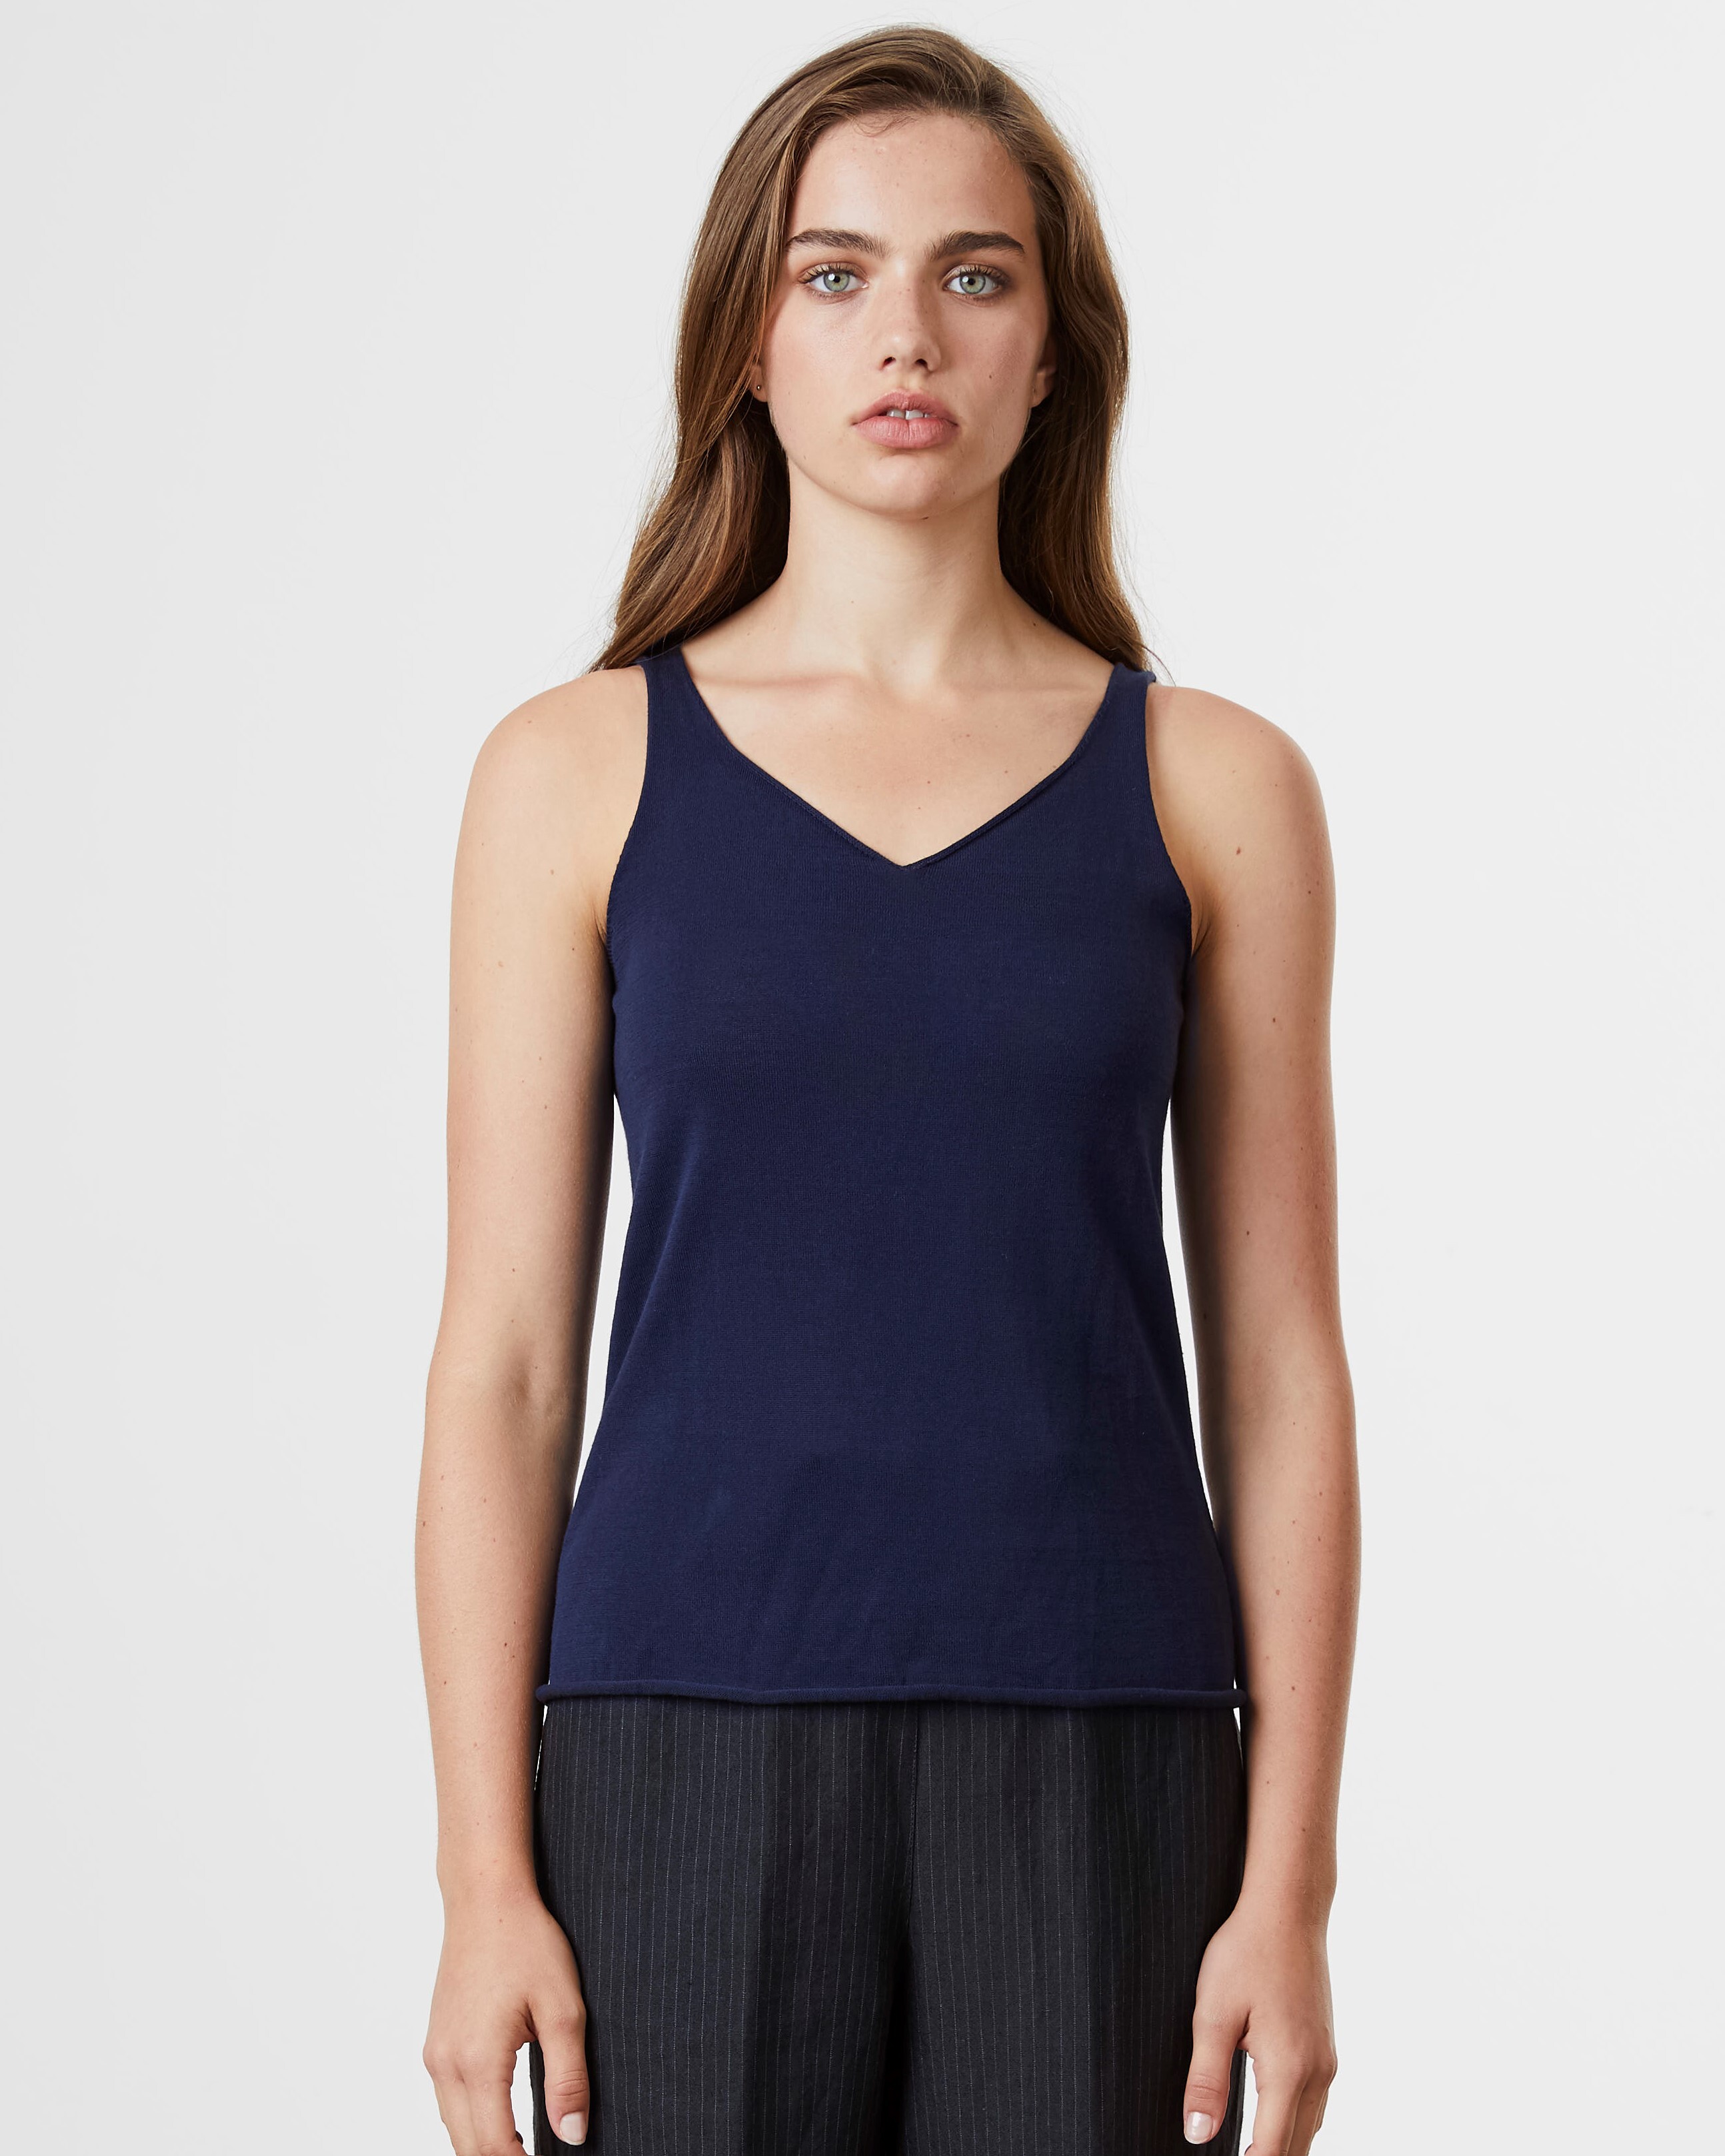 COTTON CAMI (NAVY)- STANDARD ISSUE SPRING 21 Boxing Day Sale